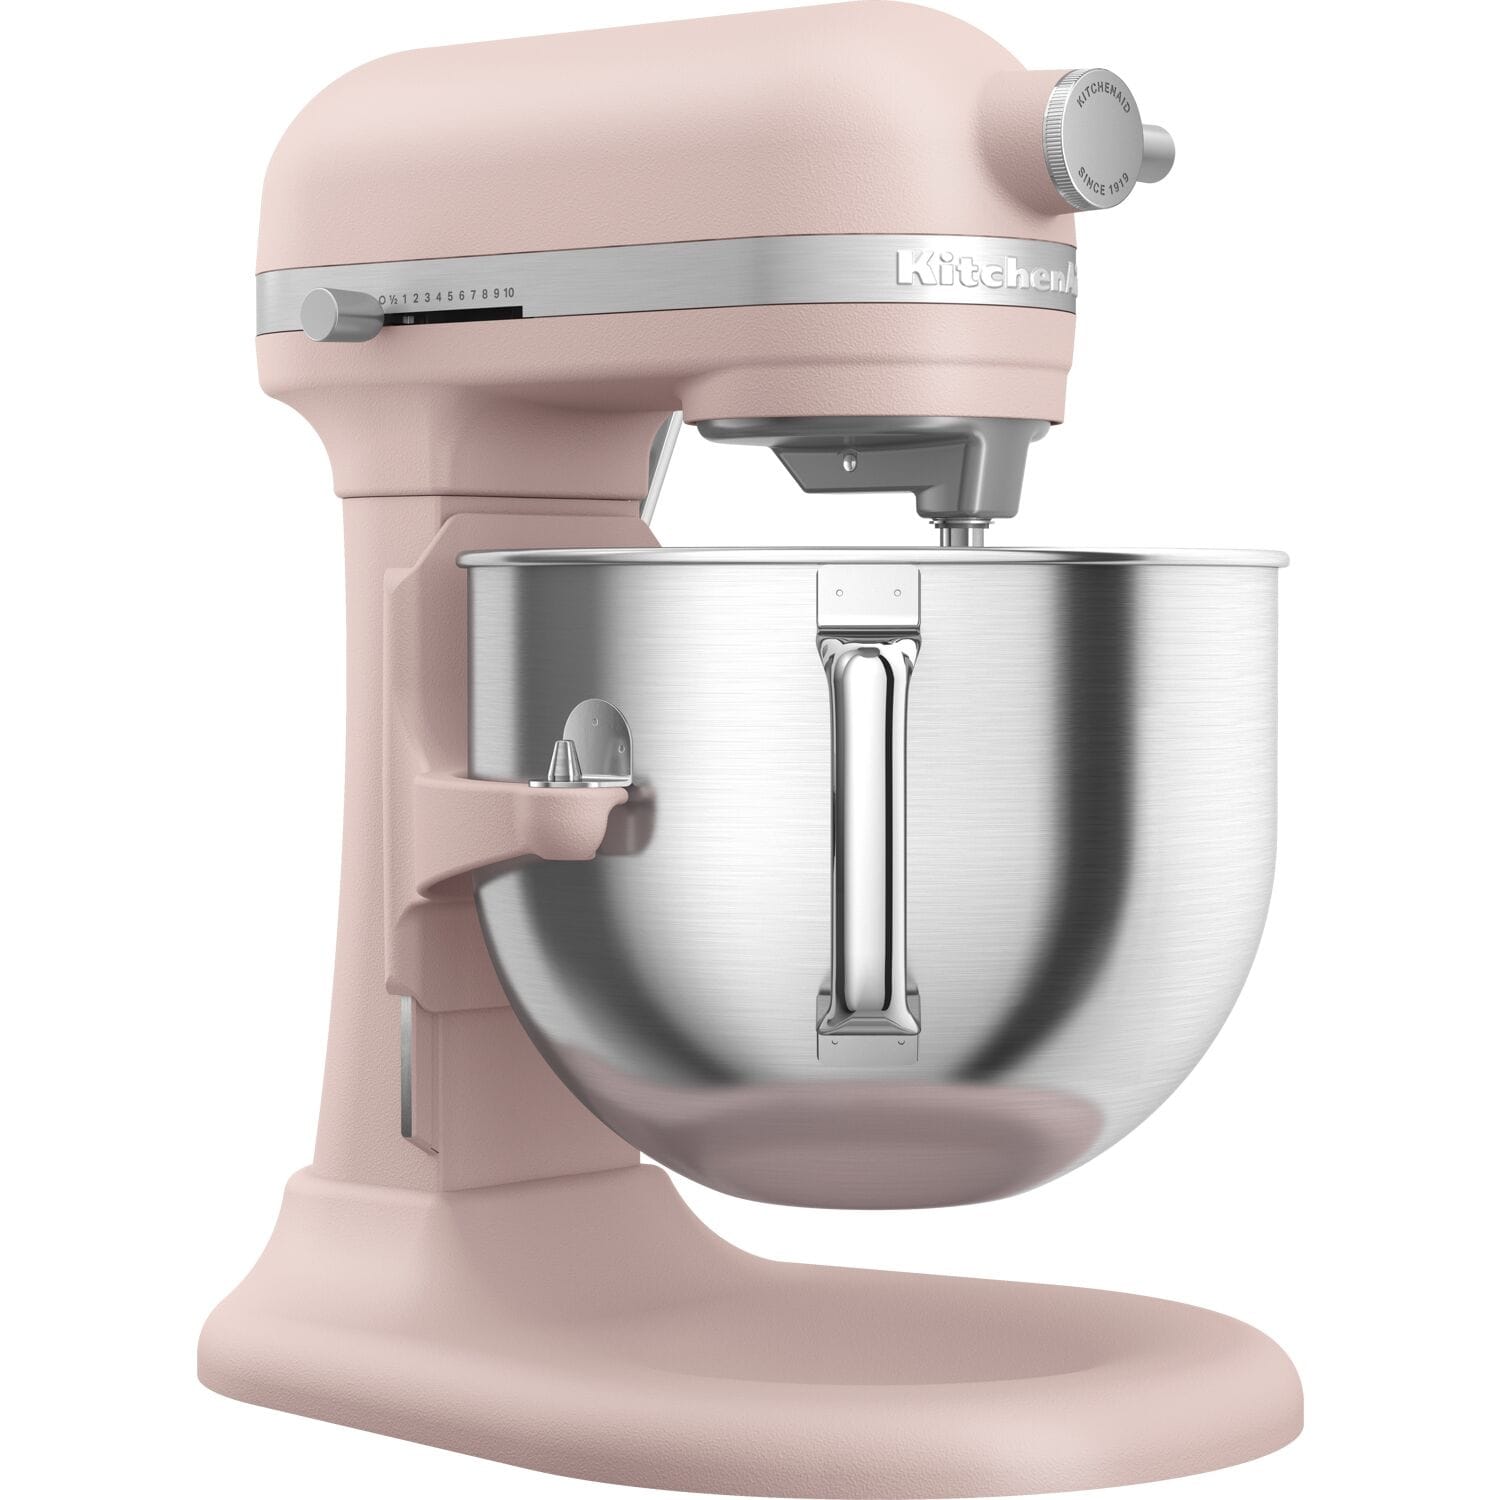 https://ak1.ostkcdn.com/images/products/is/images/direct/78eb42173d98690902635cb68d1ae81f6676d566/KitchenAid-7-Qt.-Bowl-Lift-Stand-Mixer-in-Feather-Pink.jpg